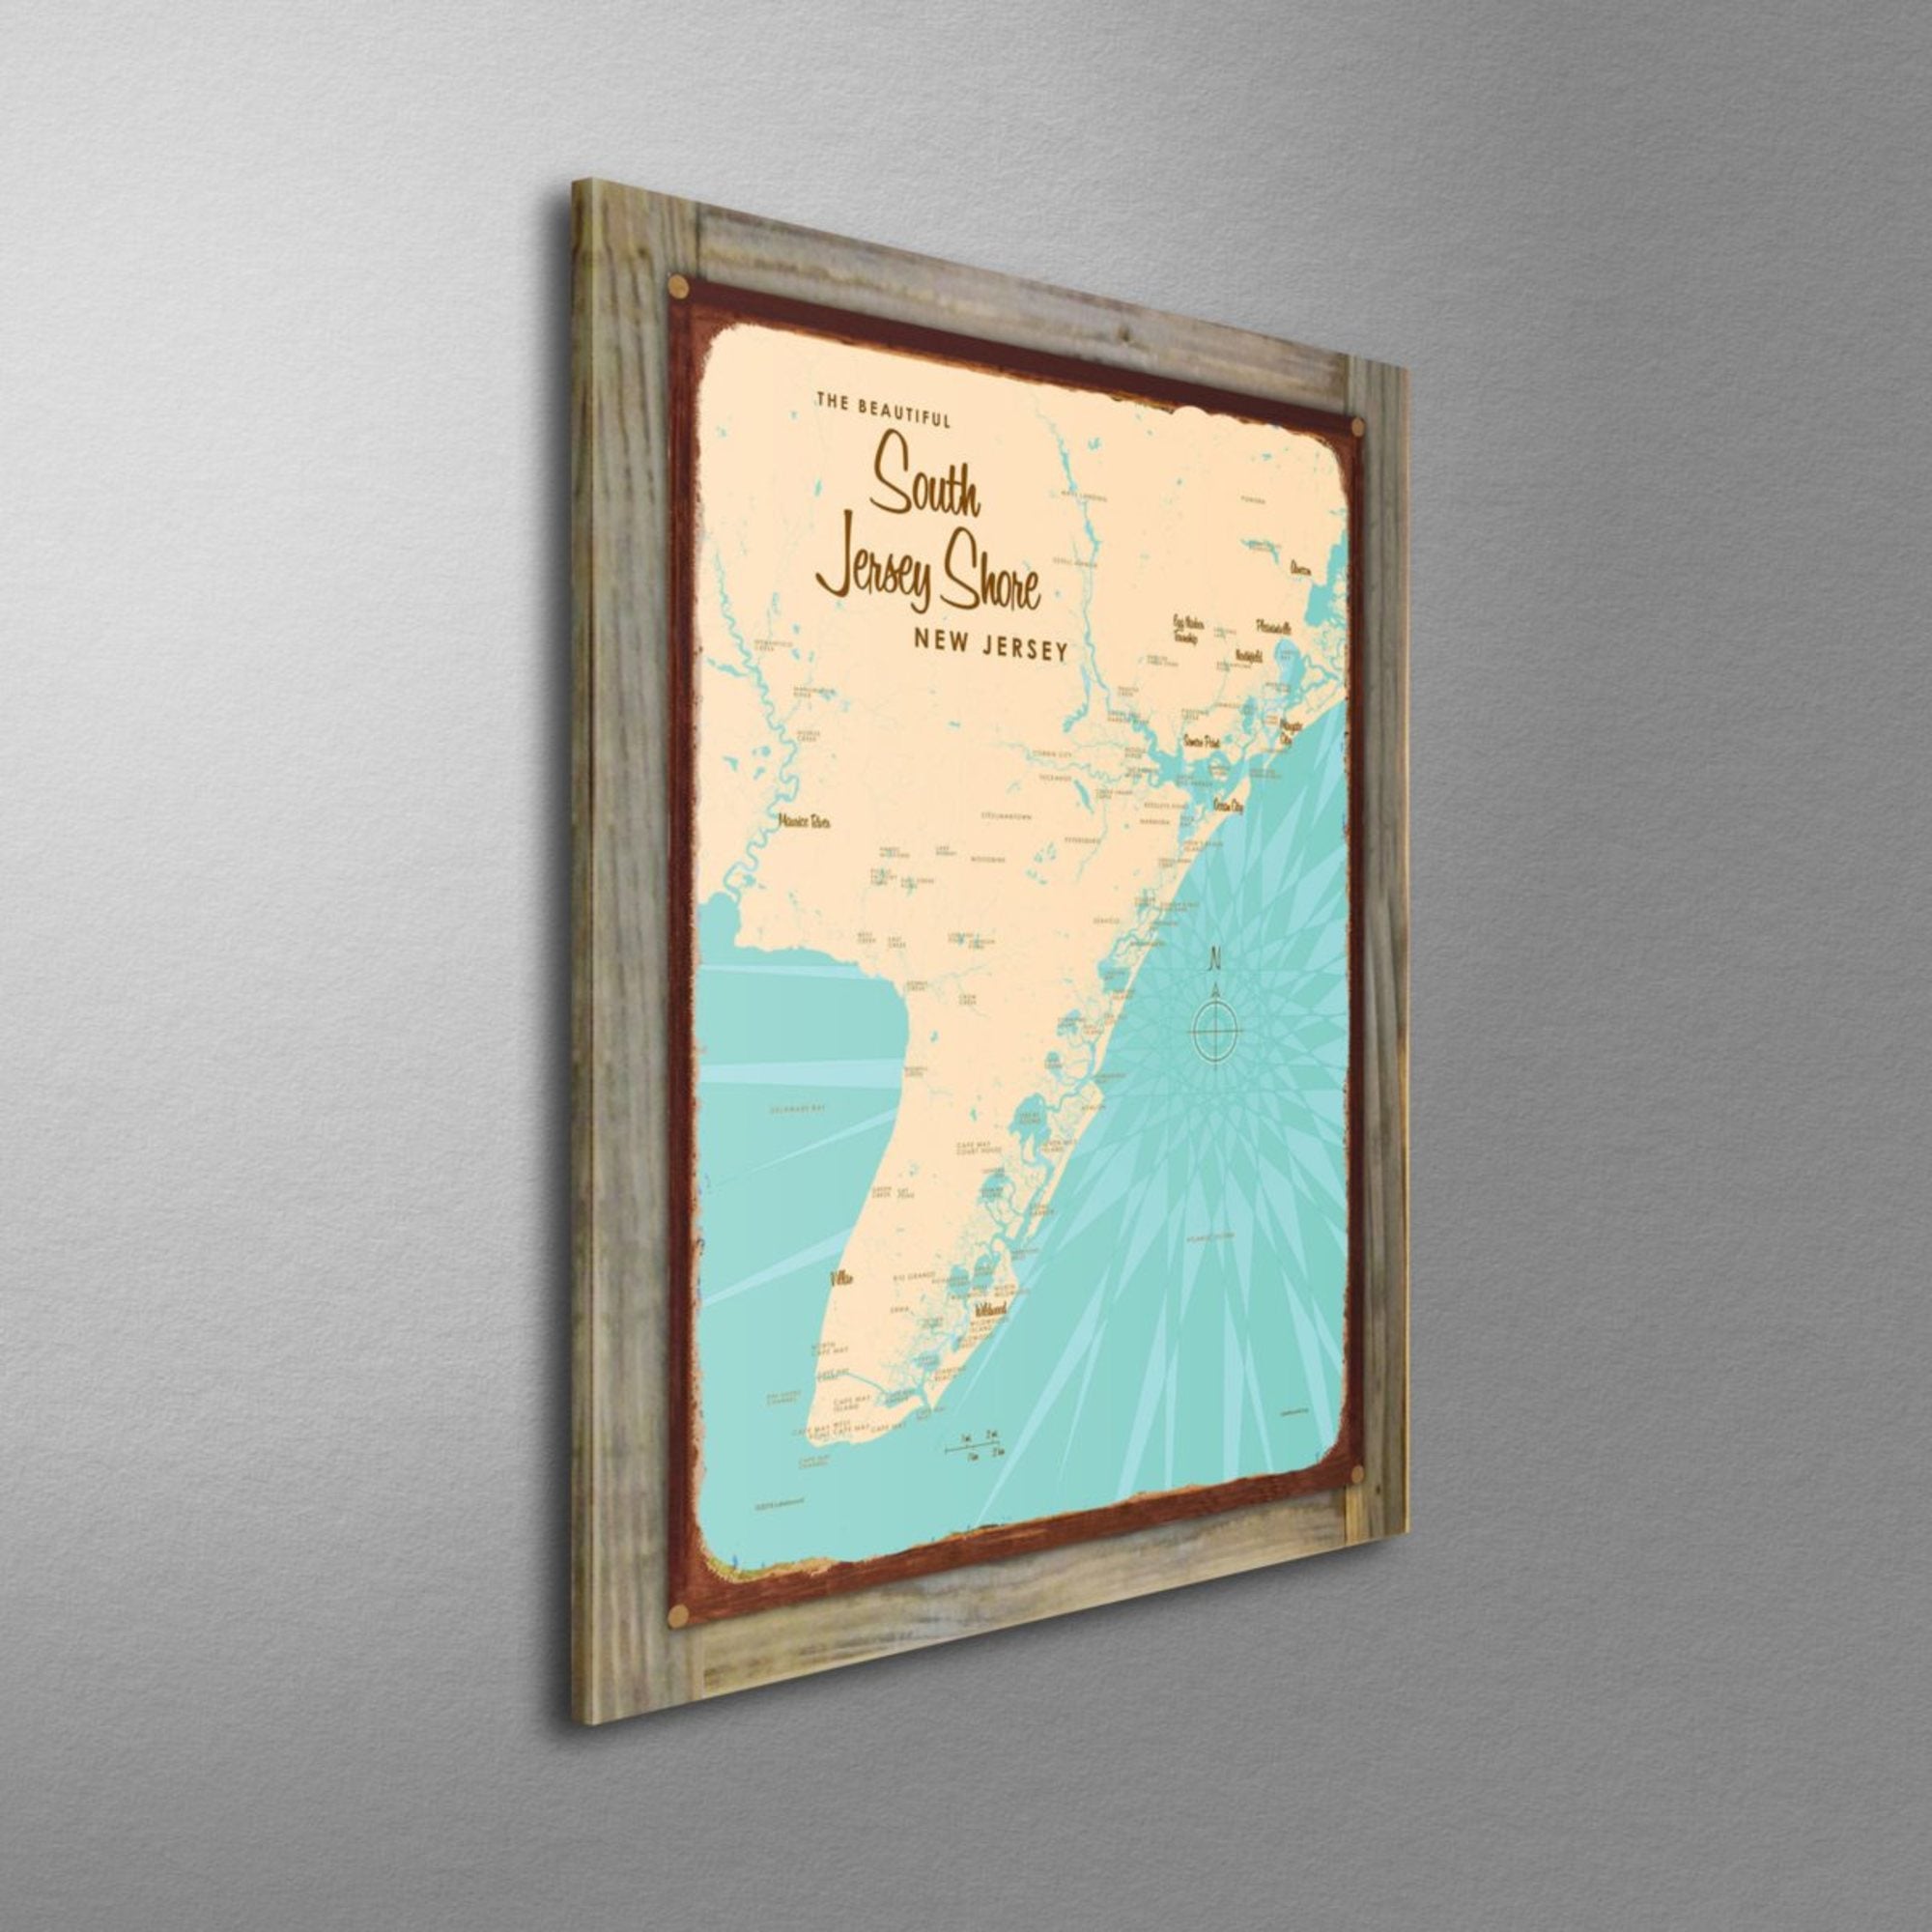 South Jersey Shore New Jersey, Wood-Mounted Rustic Metal Sign Map Art